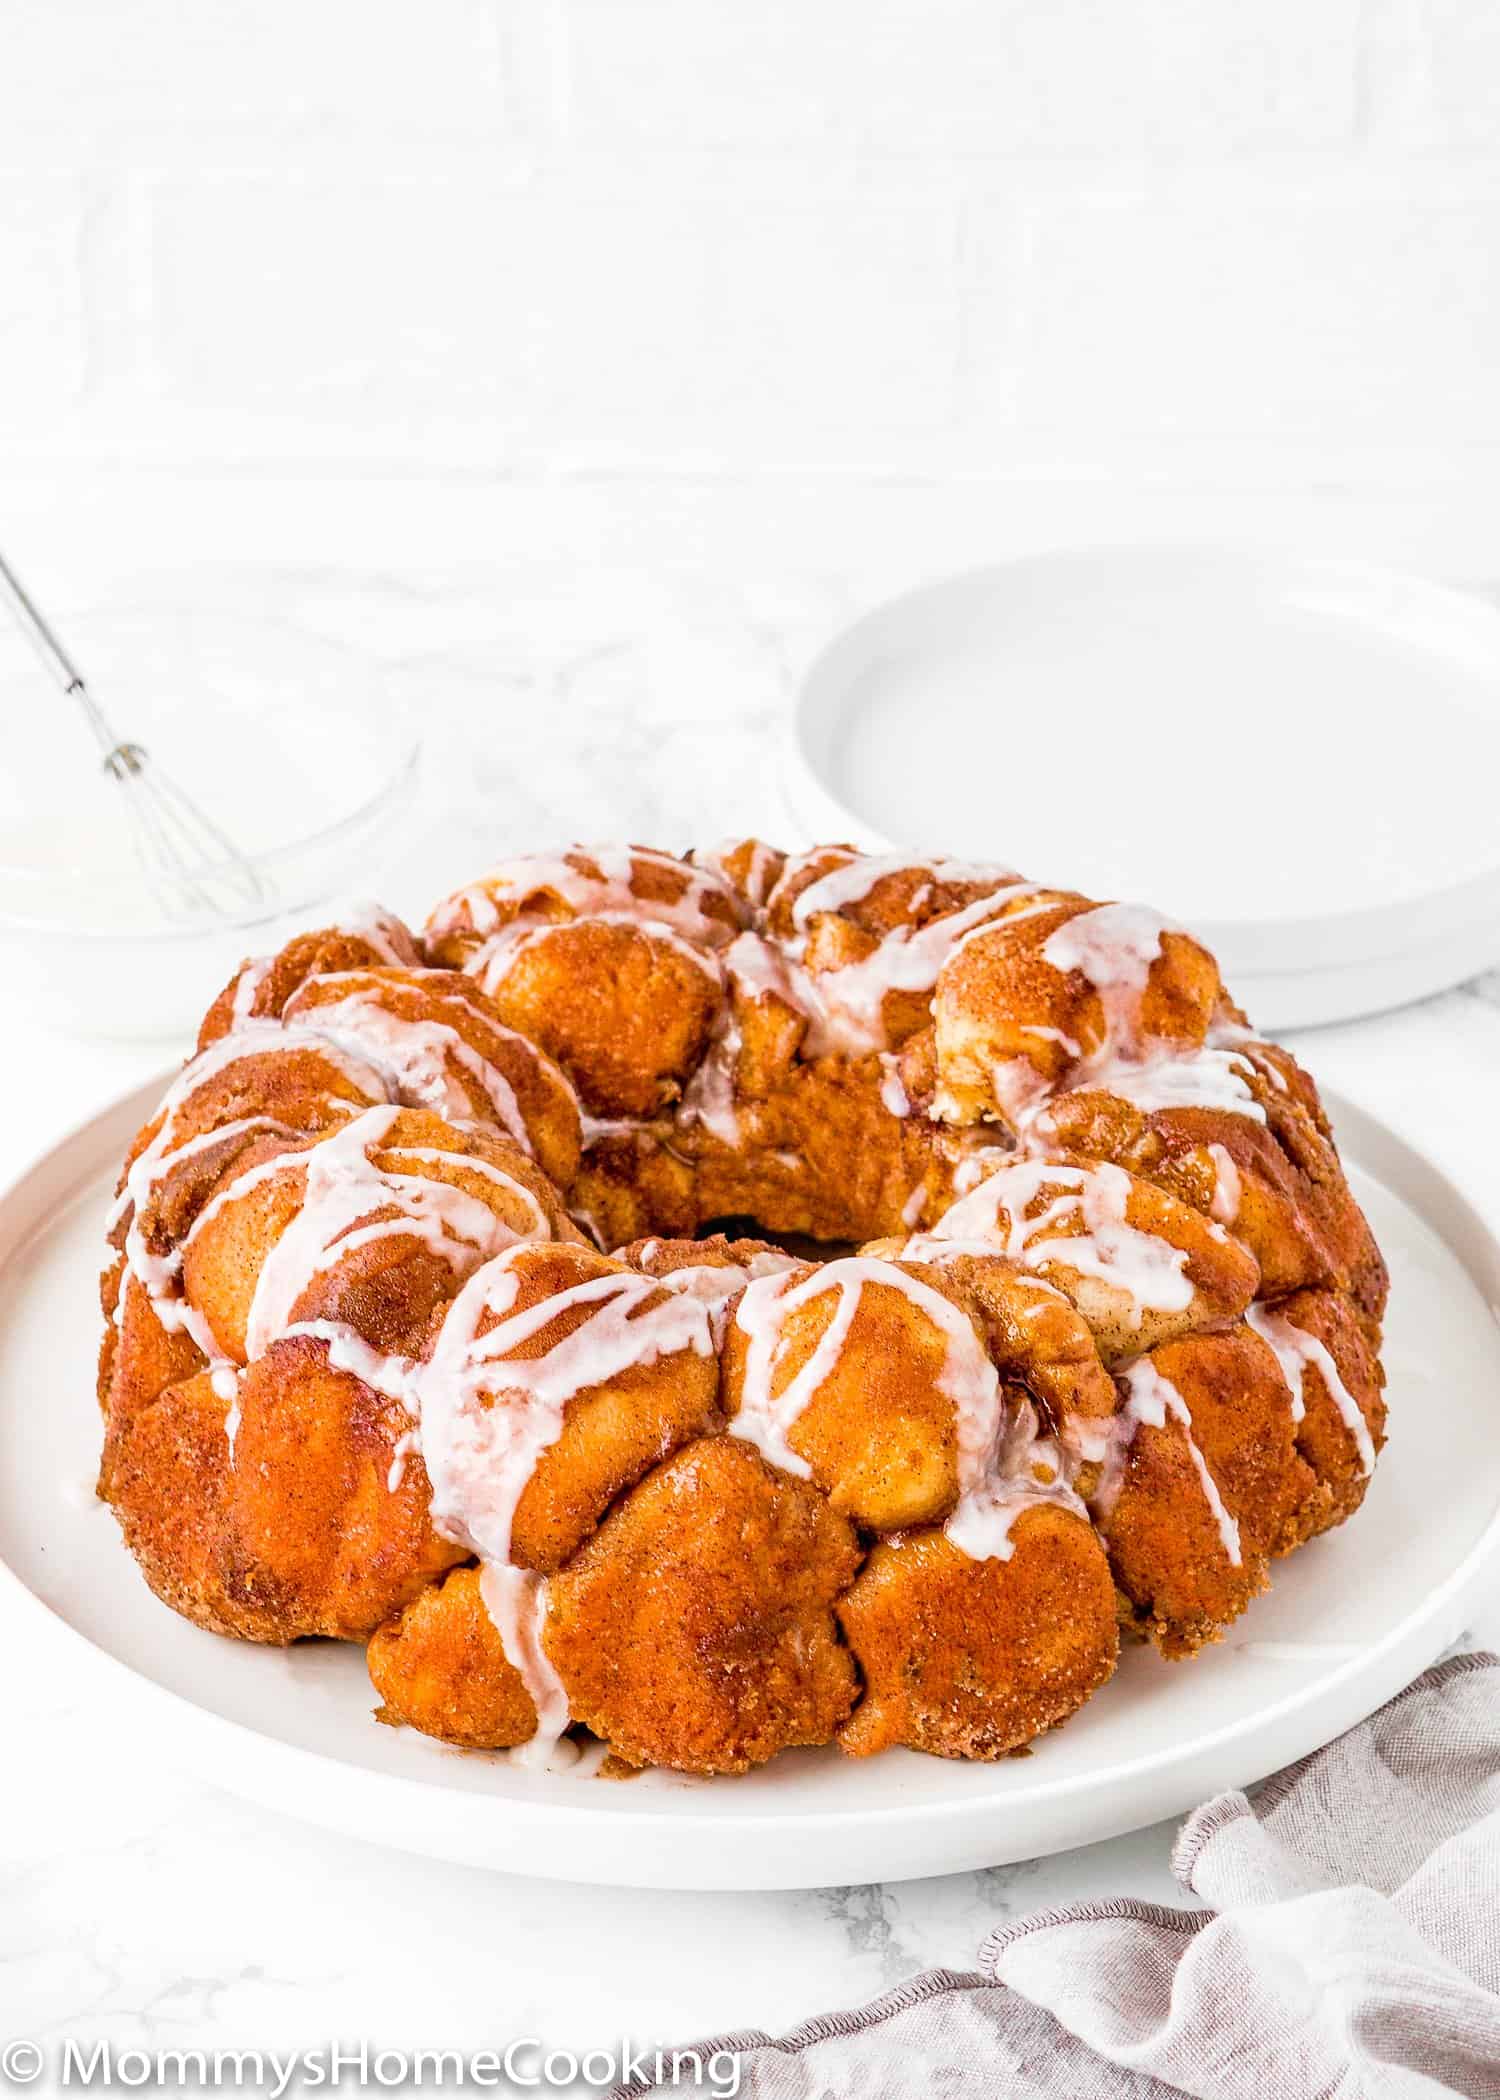 Homemade Eggless Monkey Bread on a plate drizzled with sugar glaze.